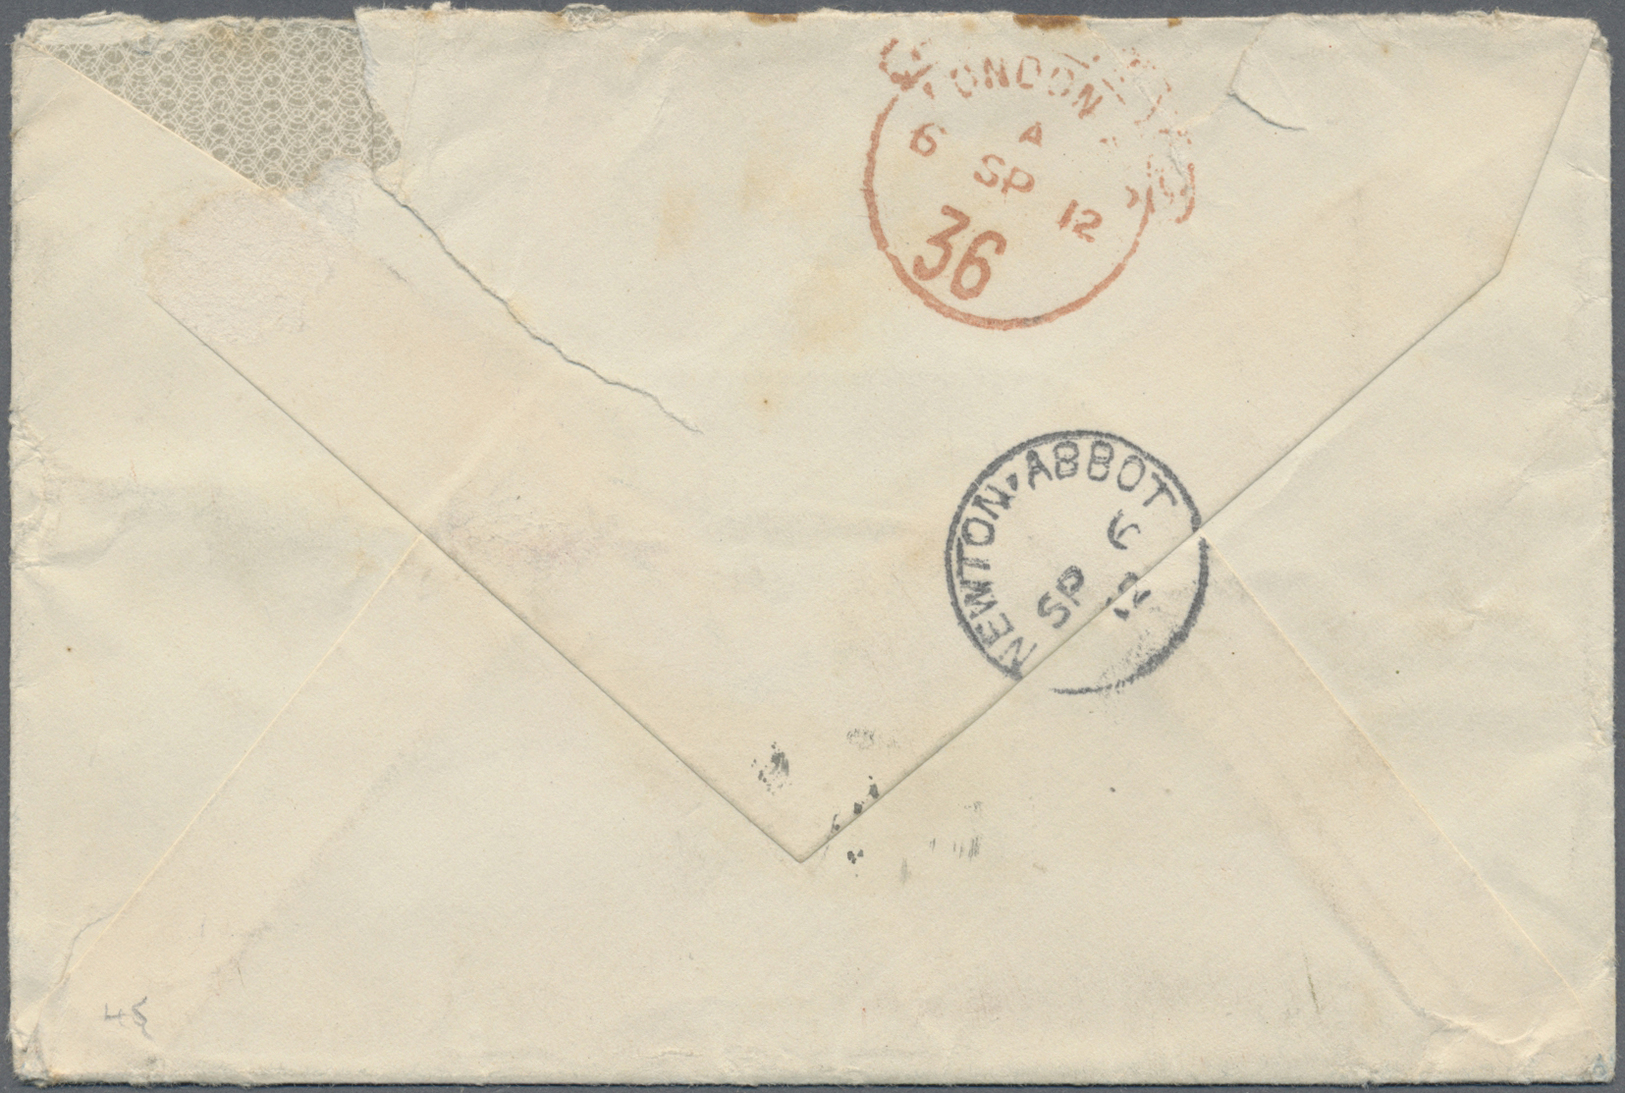 Br Indien - Feldpost: C.E.F. 1912: REGISTERED Cover (small Faults) From F.P.O. No.1 (Peking) To Newton Abbot, England Fr - Military Service Stamp